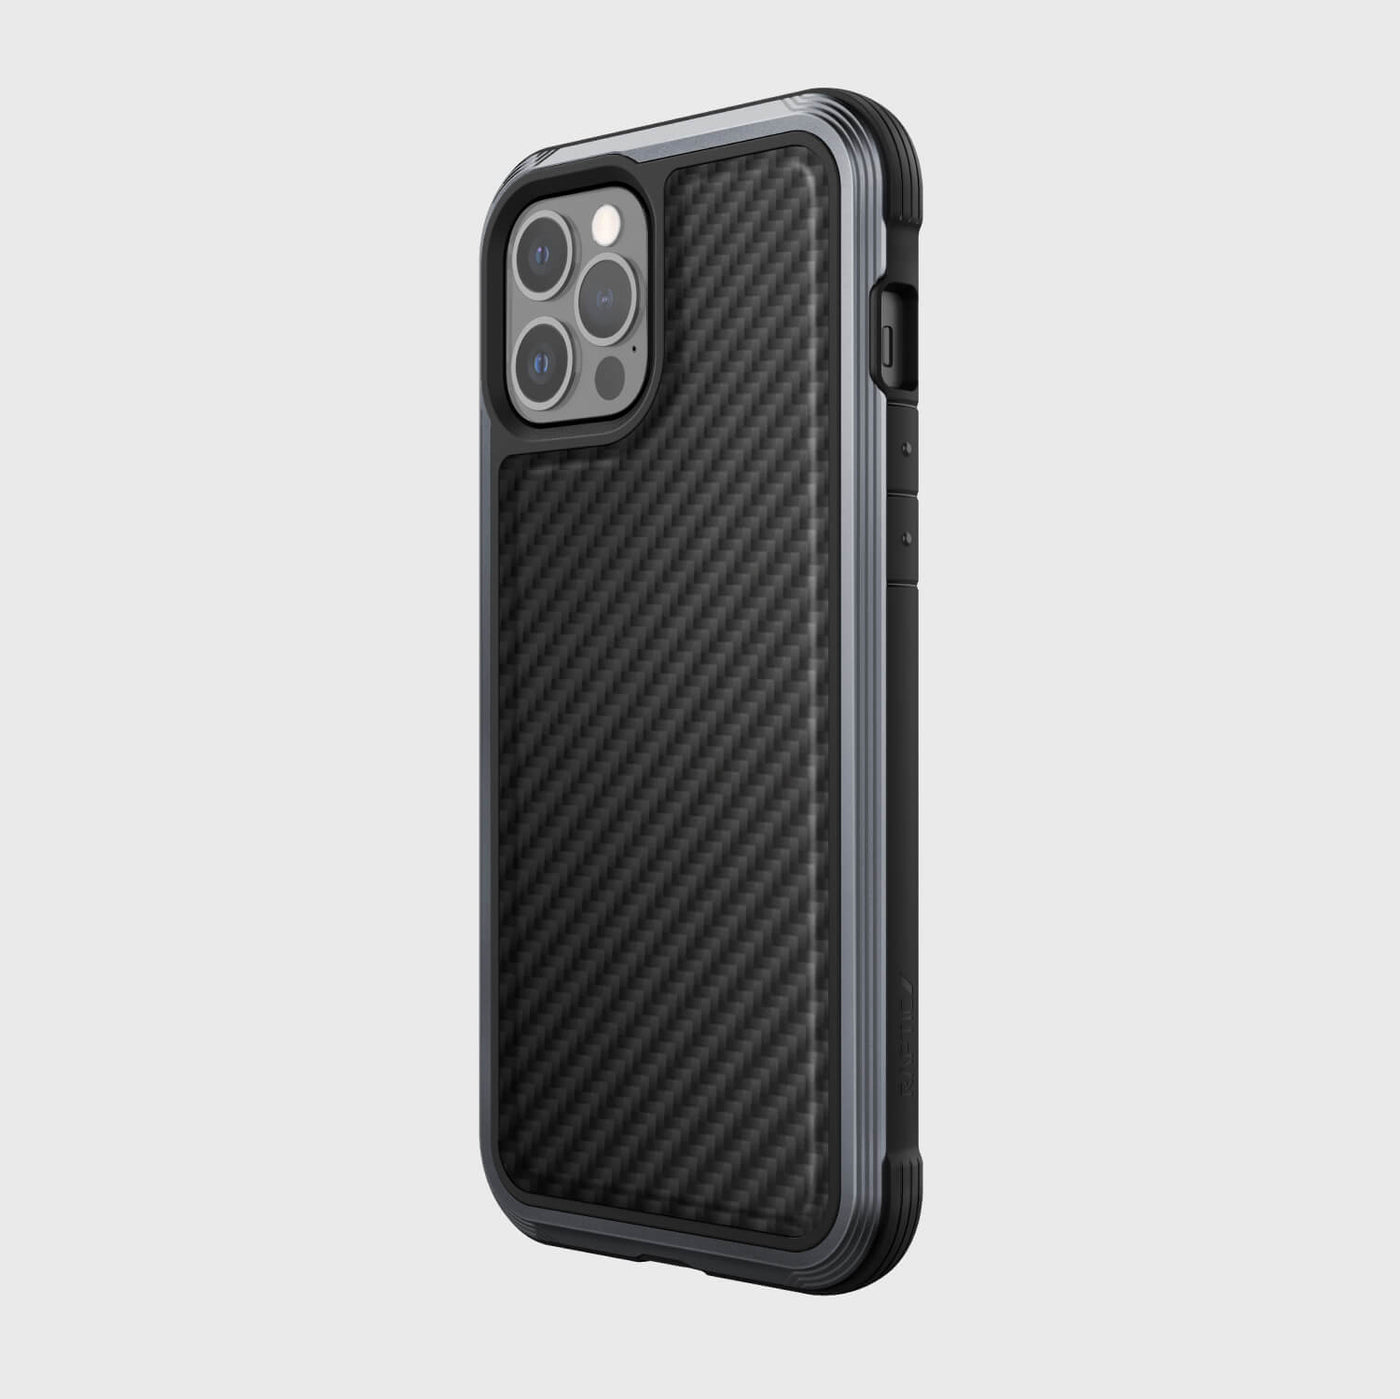 Luxurious Case for iPhone 12 Pro Max. Raptic Lux in black carbon fiber.